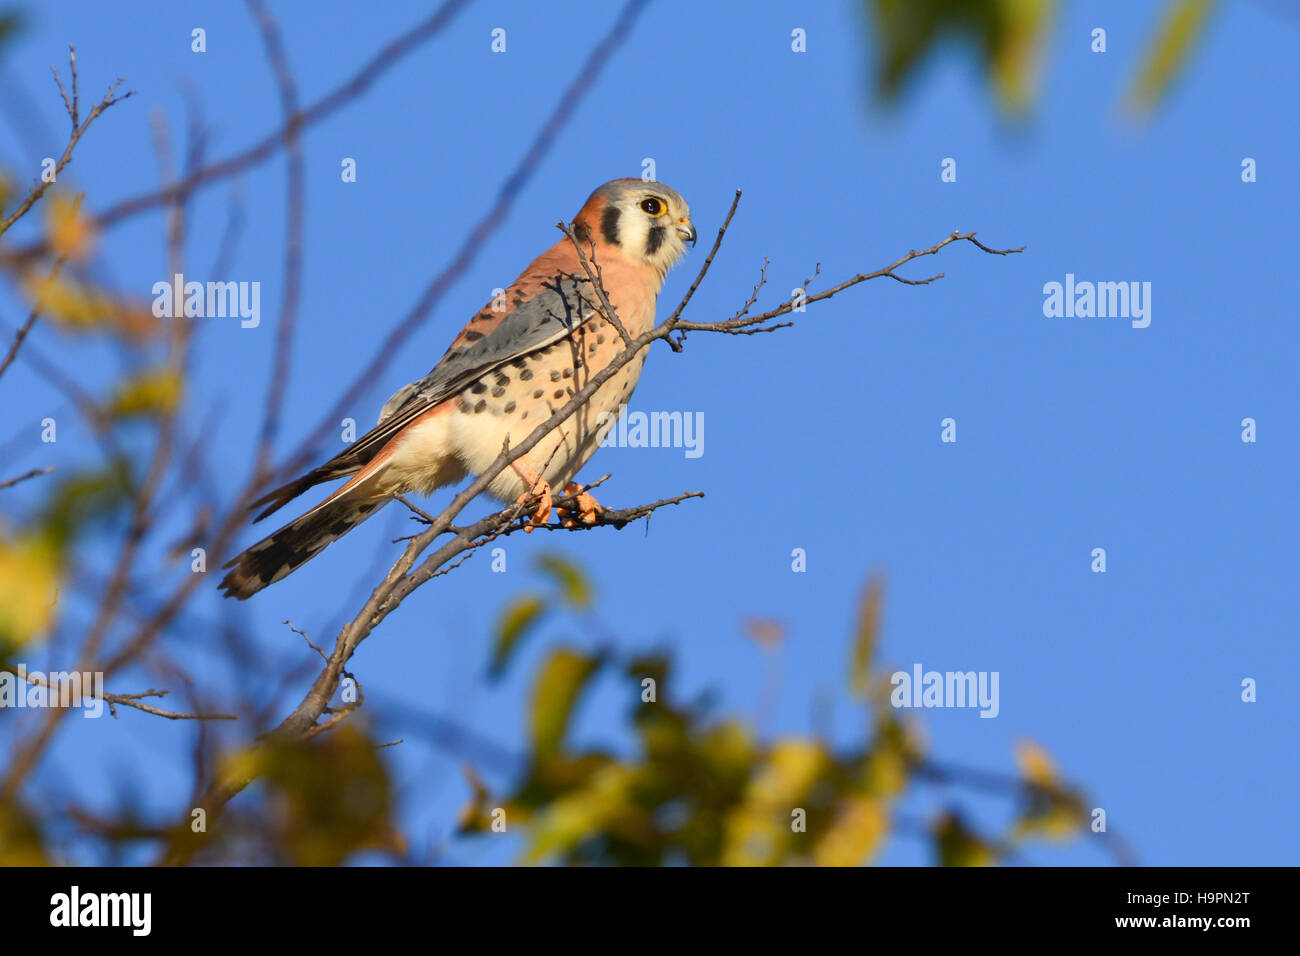 American Kestrel or sparrow hawk perched upright on a branch scanning for prey Stock Photo